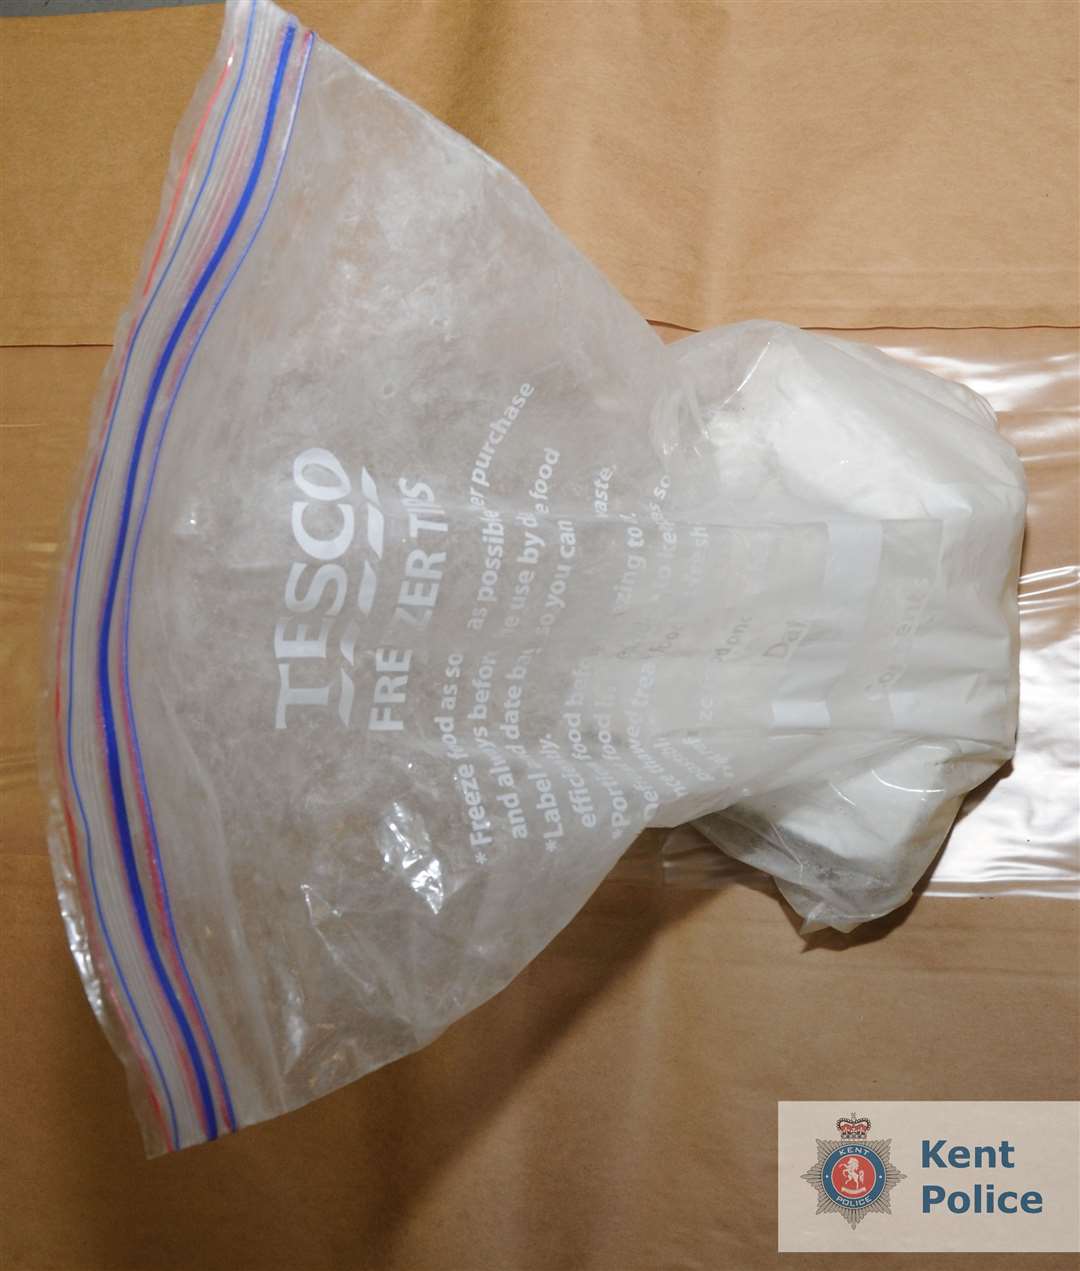 Cocaine was seized from the vehicle. Picture: Kent Police